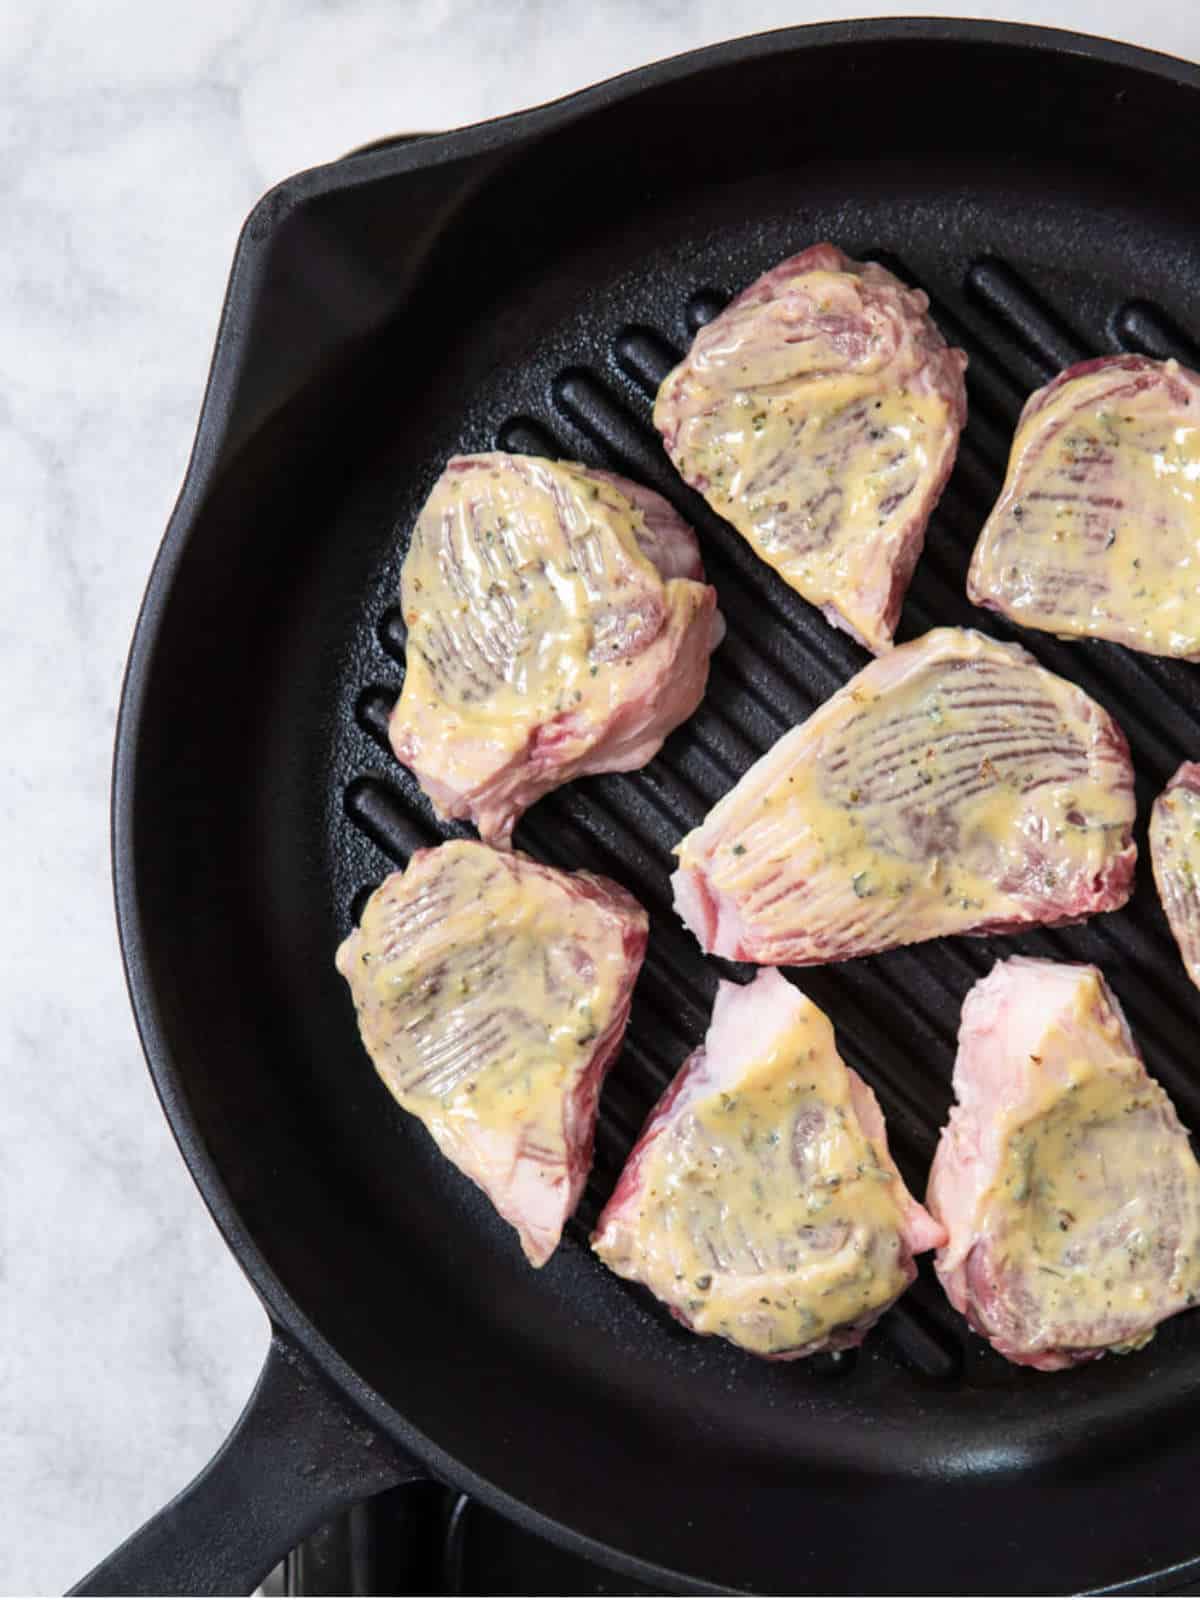 lamb chops coated in mustard in cast iron skillet.